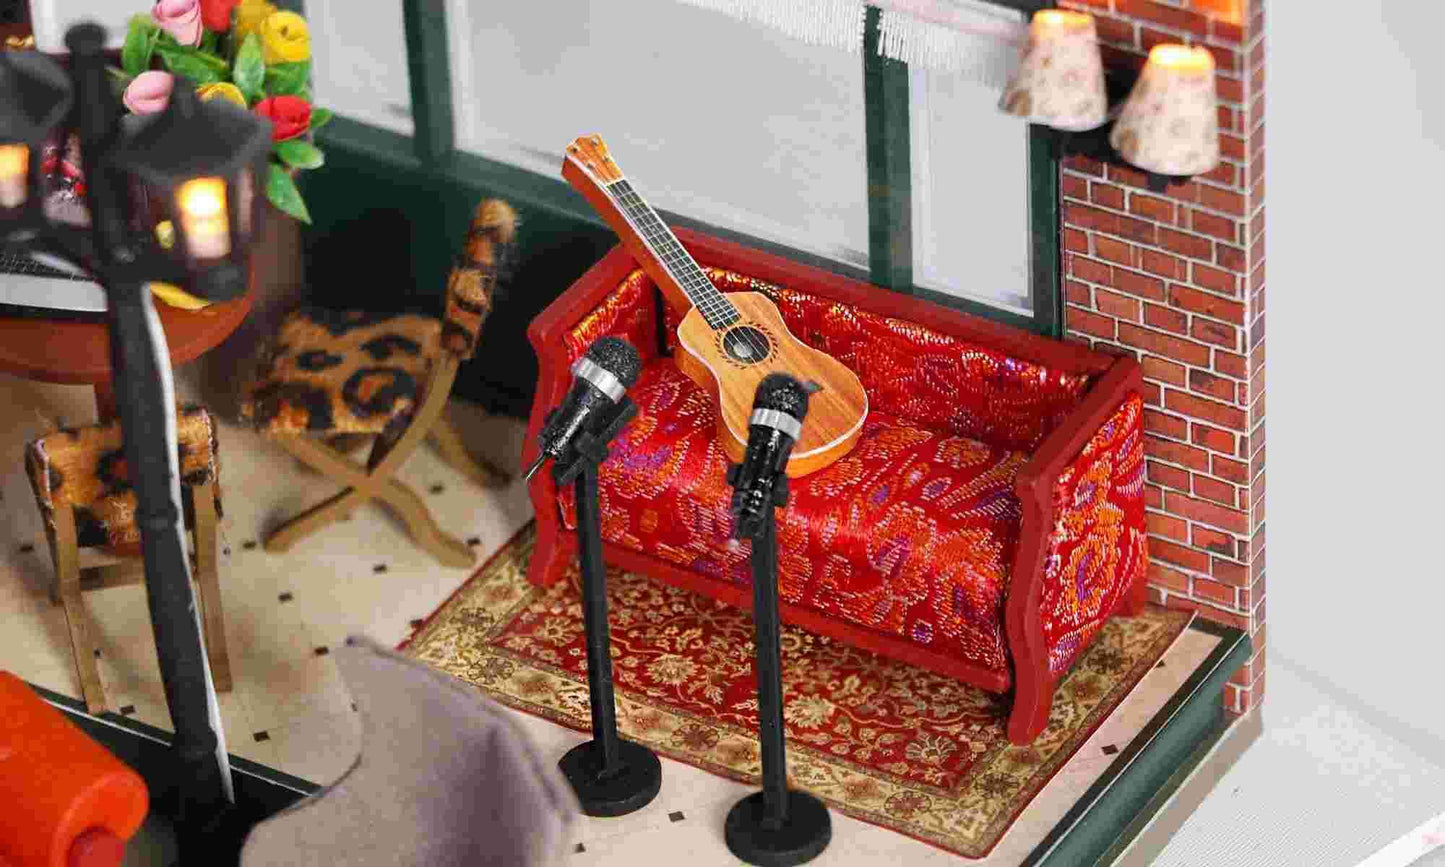 Central Perk DIY Dollhouse kit, a miniature house crafts inspired by the TV show "Friends", perfect for model building lovers, dollhouse collectors, home decor, A great DIY project for "Friends" fans.